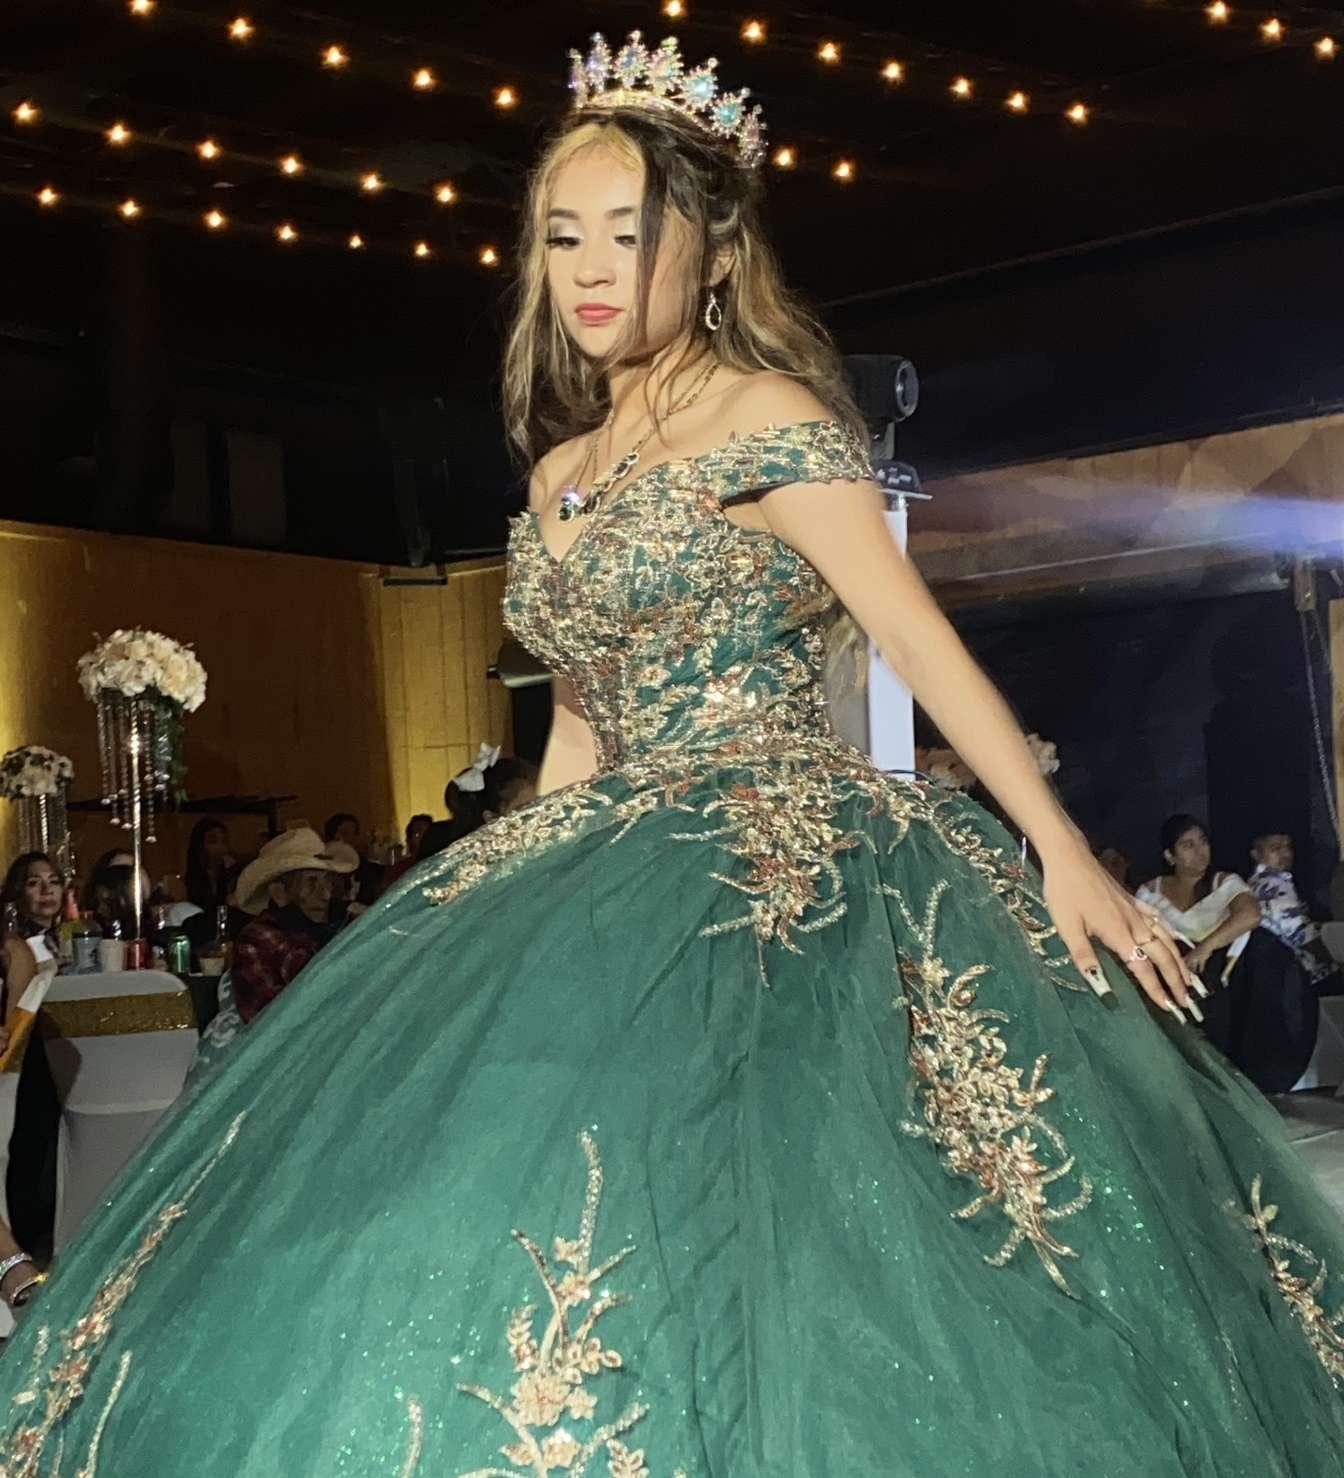 Donalyn Martinez in her Quince dress.